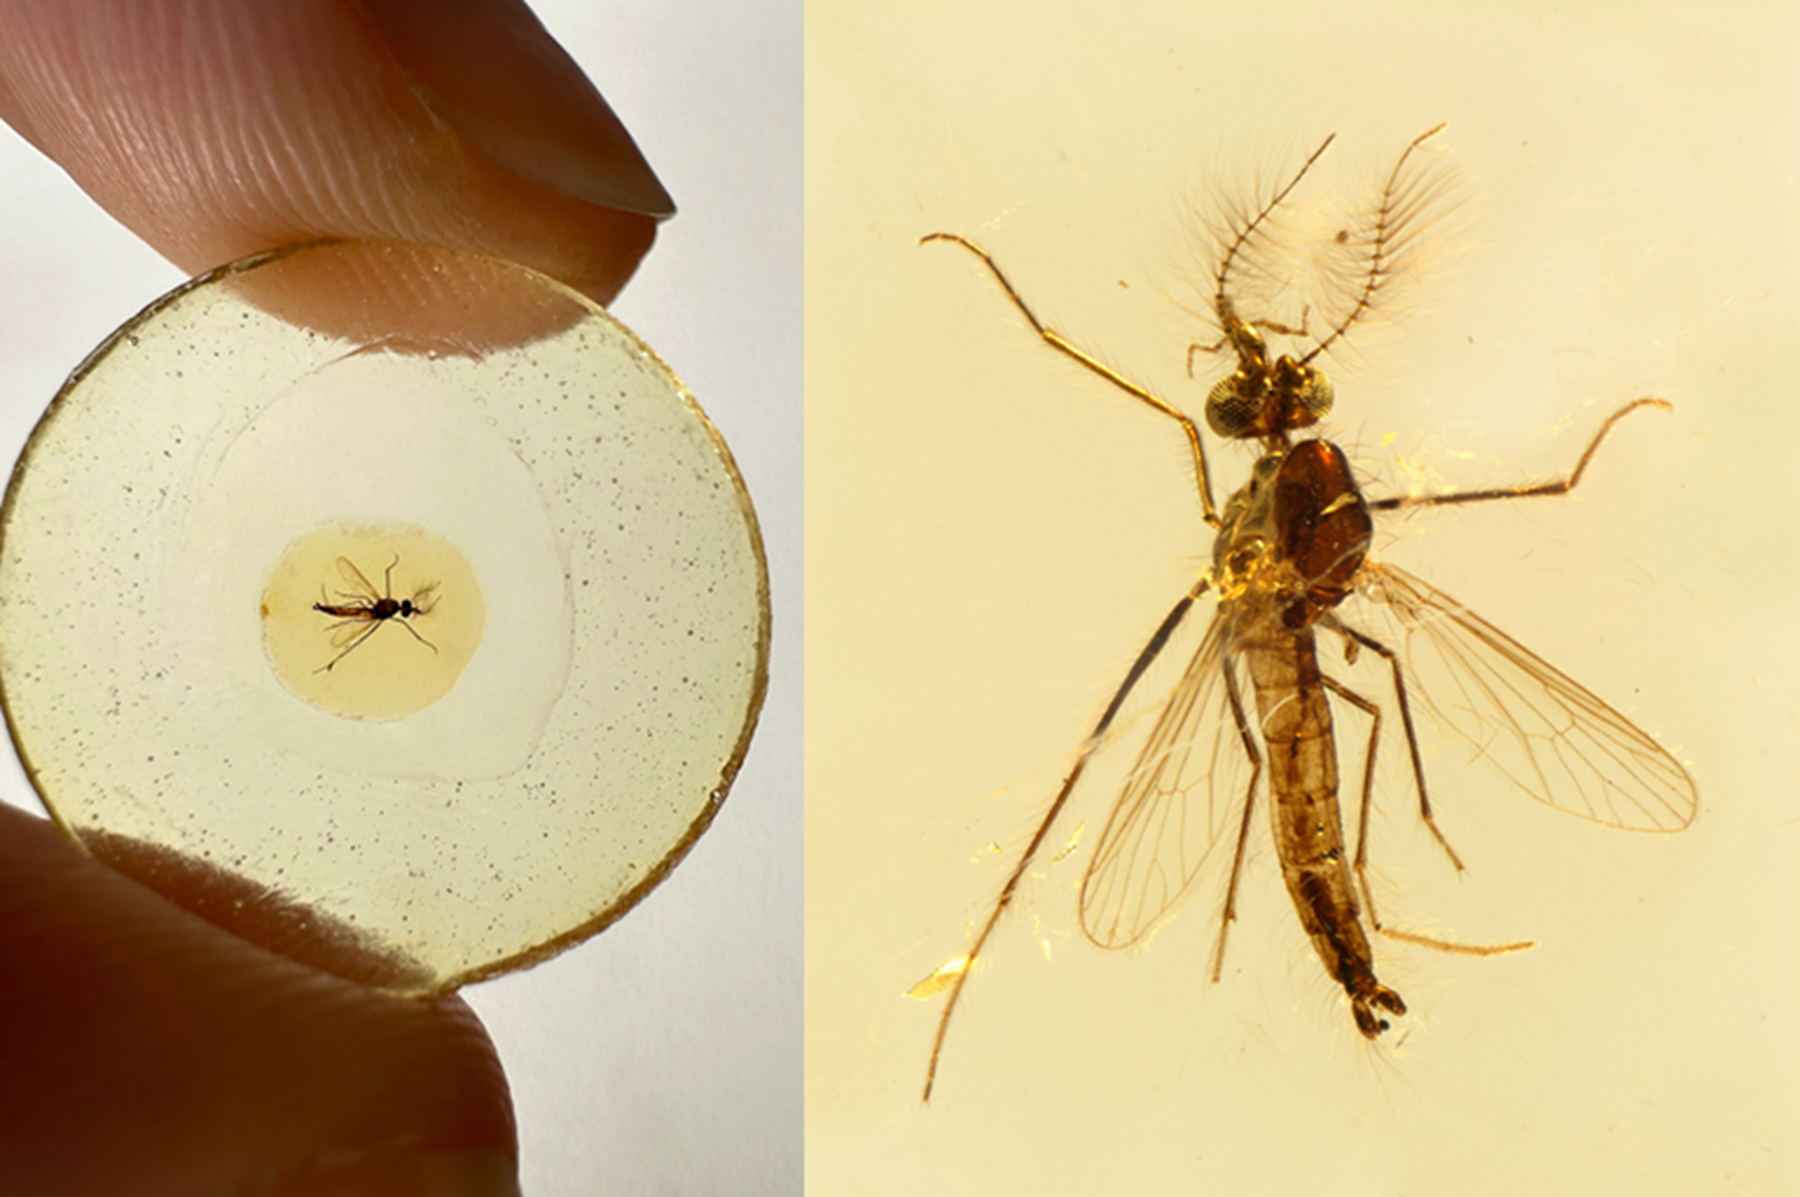 Fossil Suggests Ancient Male Mosquitoes Likely Suck Blood